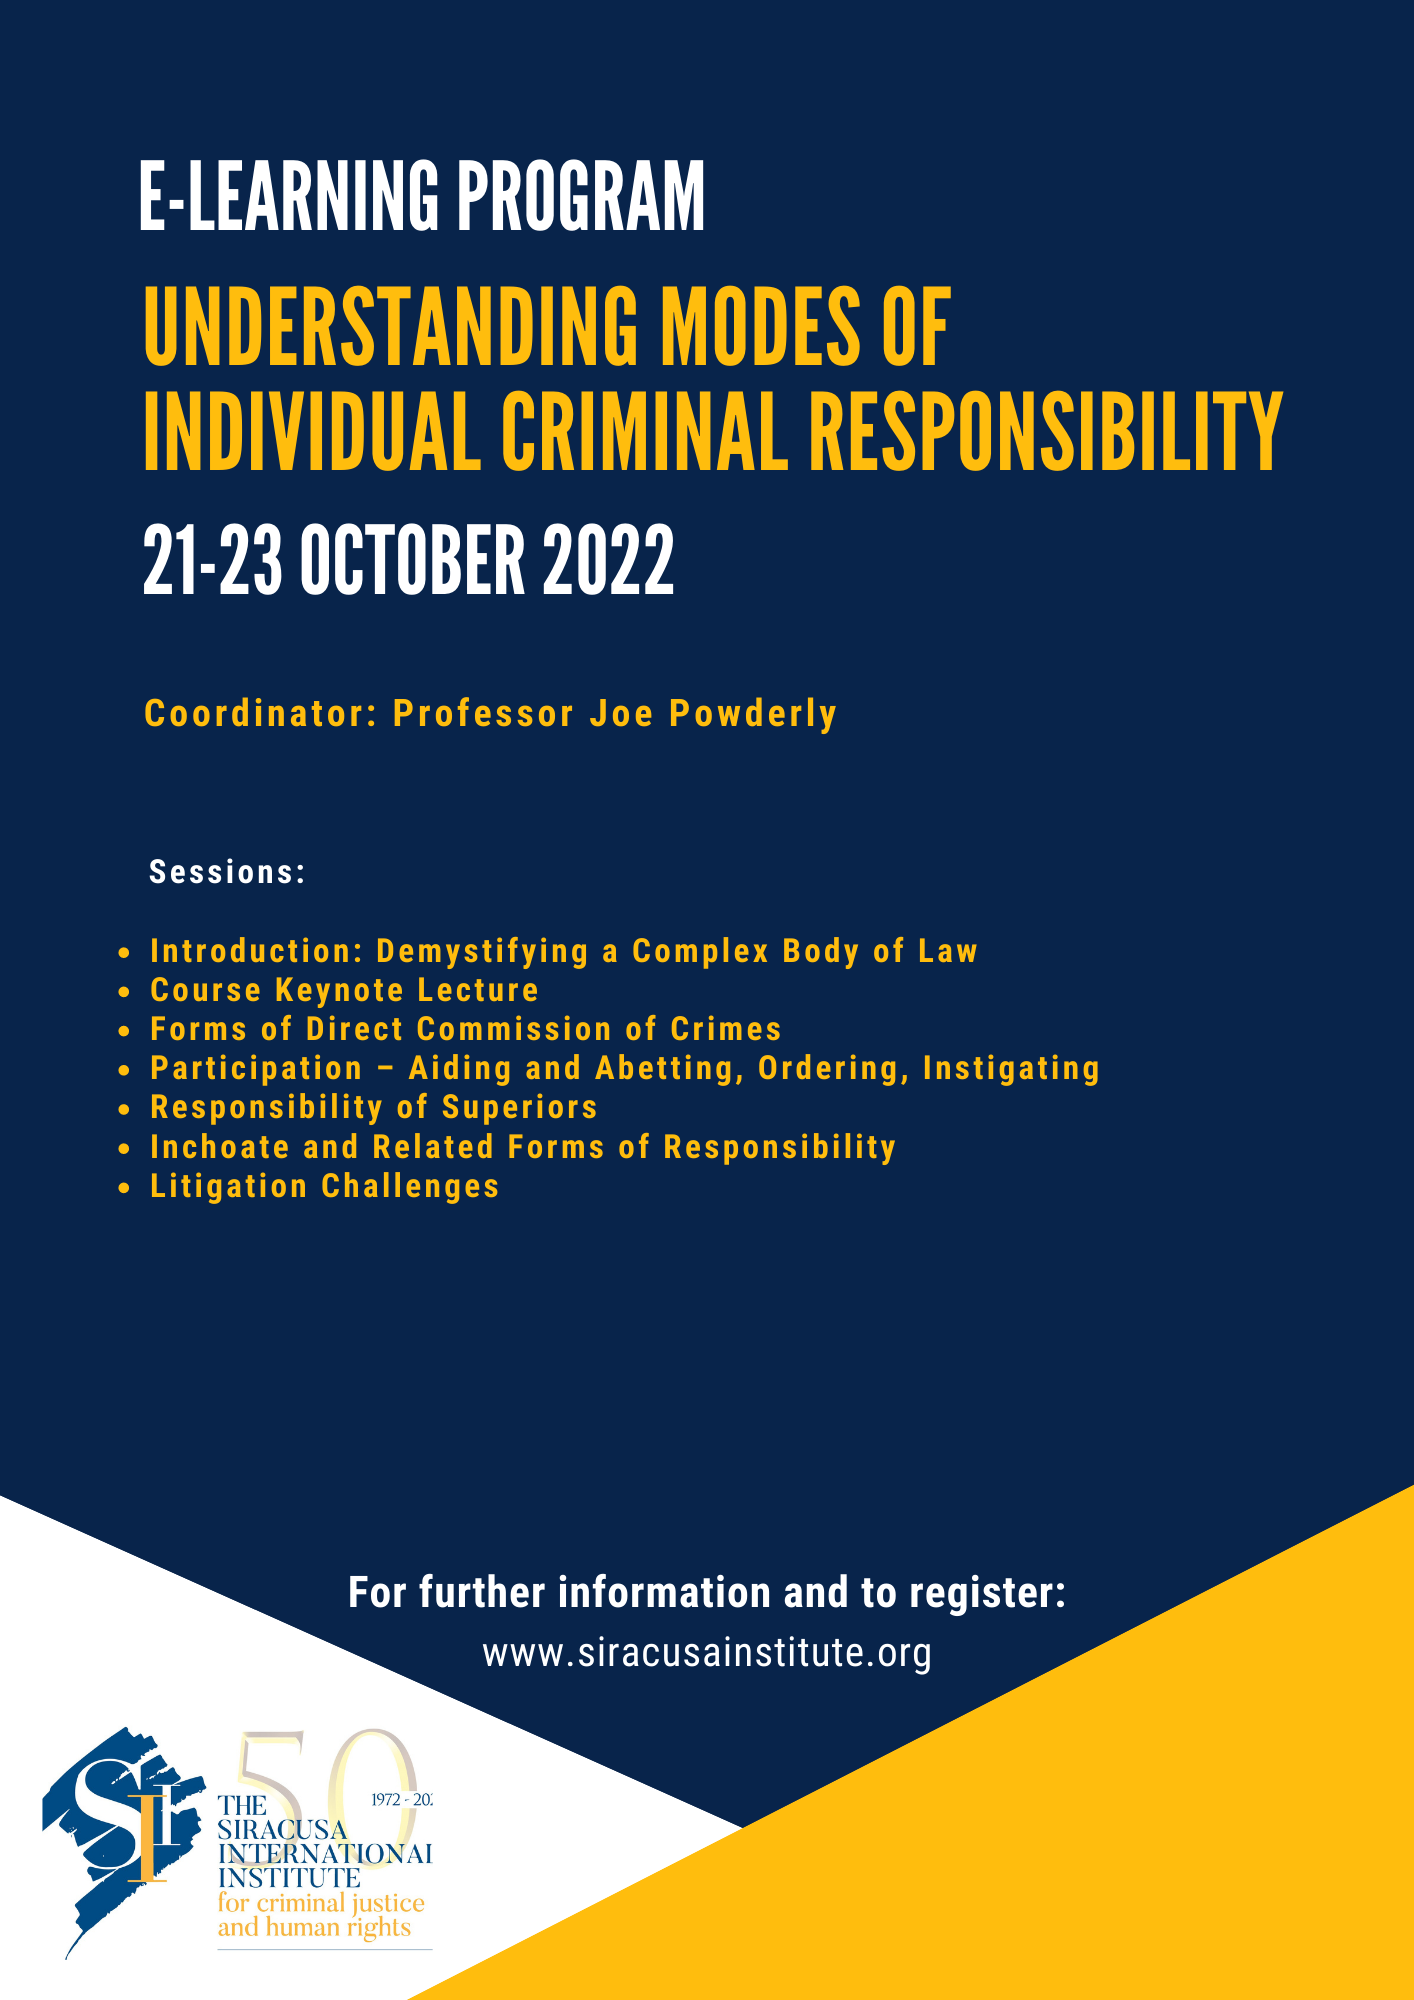 E-learning Programme: Understanding Modes of Individual Criminal Responsibility